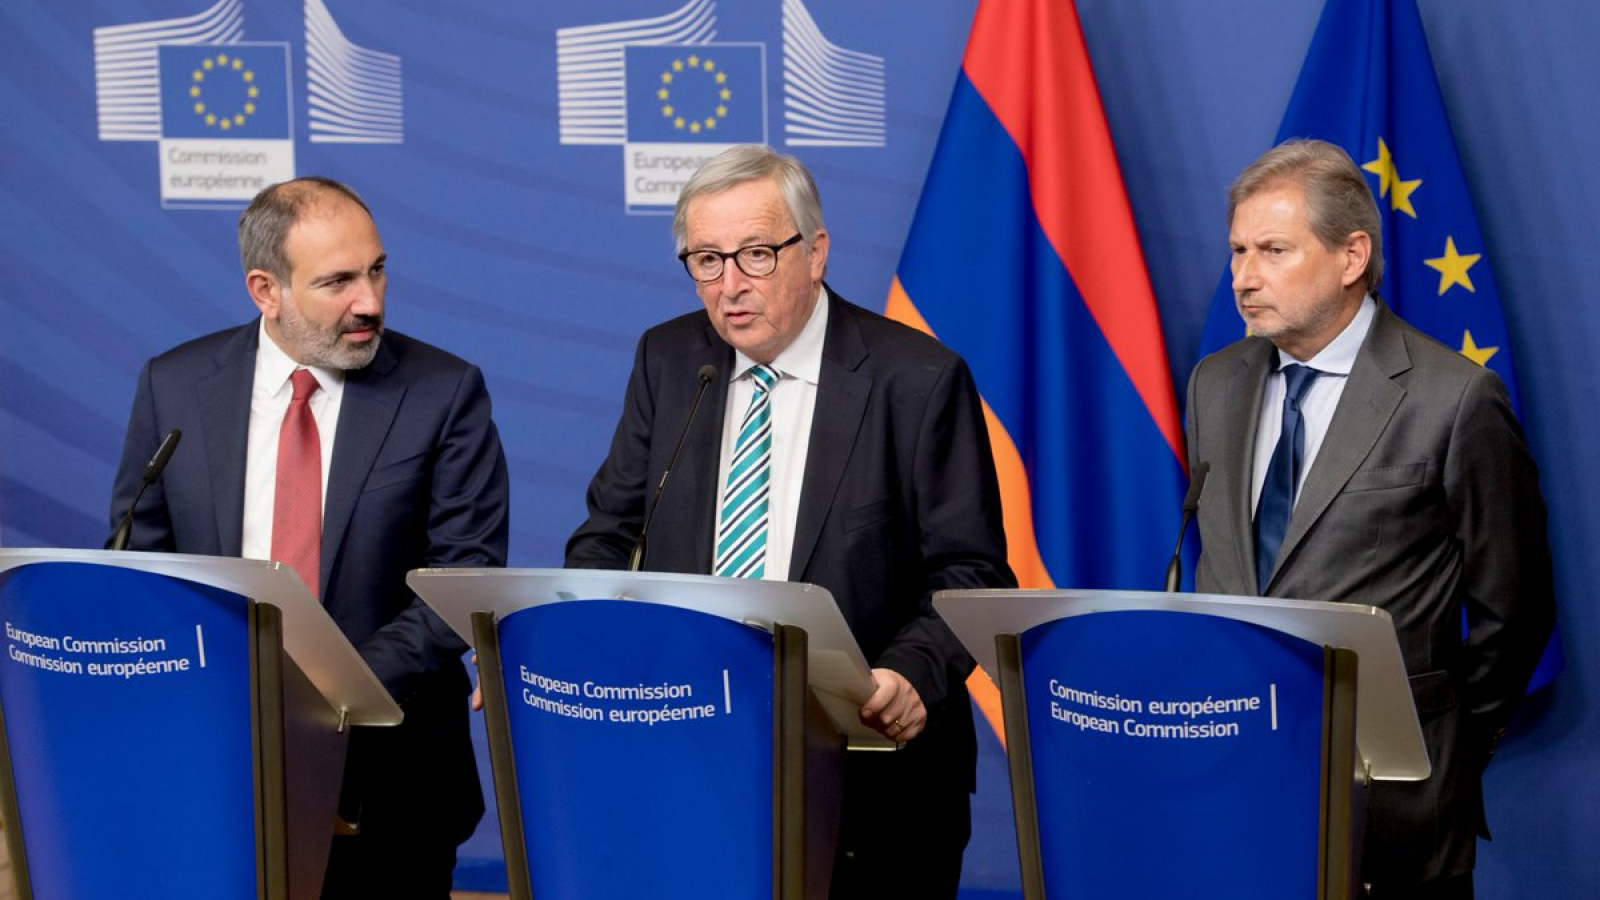 President Juncker: European Commission is in favour of starting negotiations on visa liberalisation with Armenia